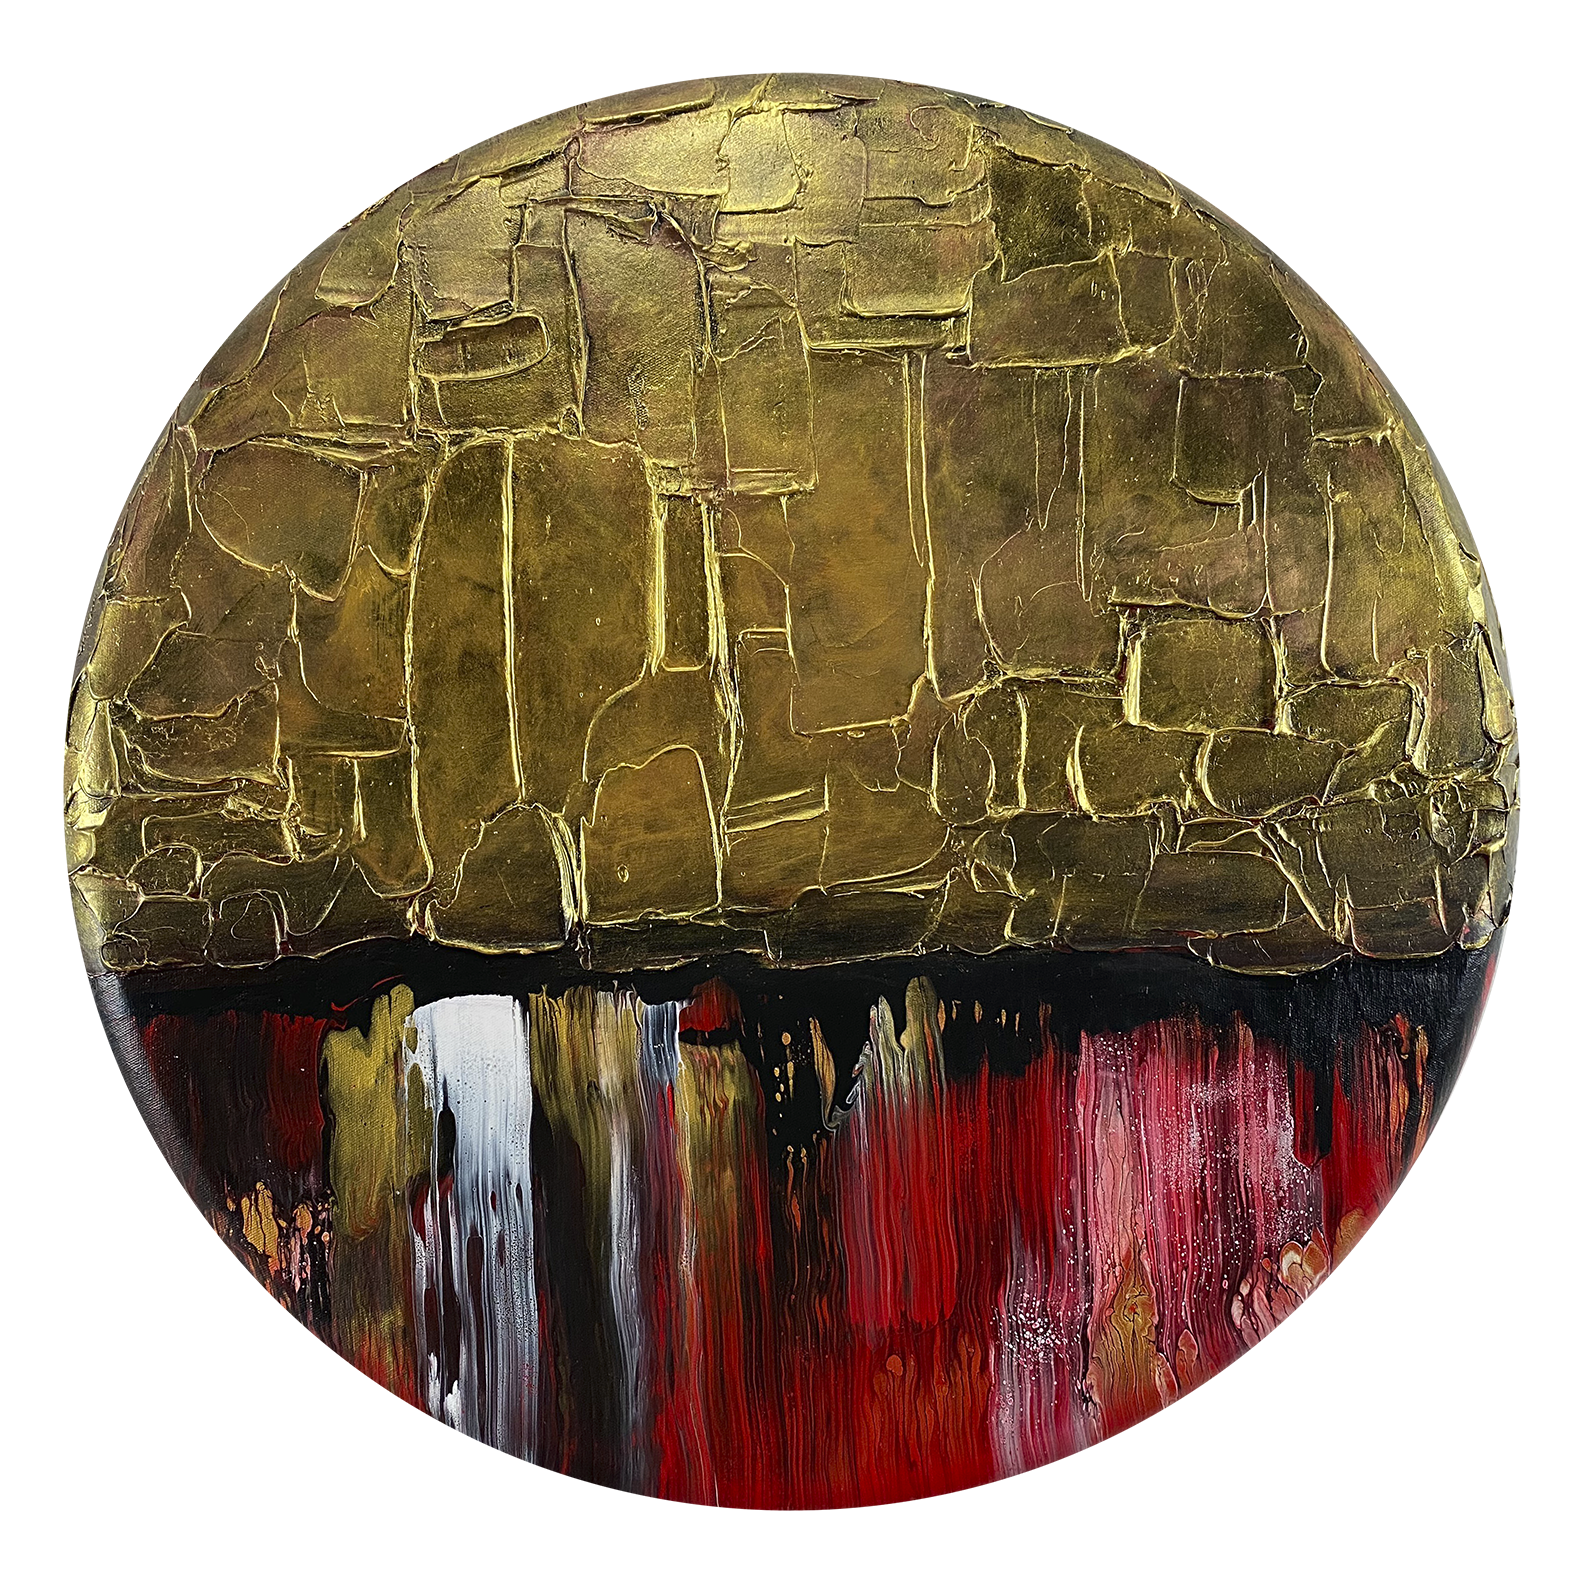 Full view of the abstract acrylic and mixed-media painting: texture paste, gold foil with black, red, white and gold acrylic paint on round canvas with curved-edges.